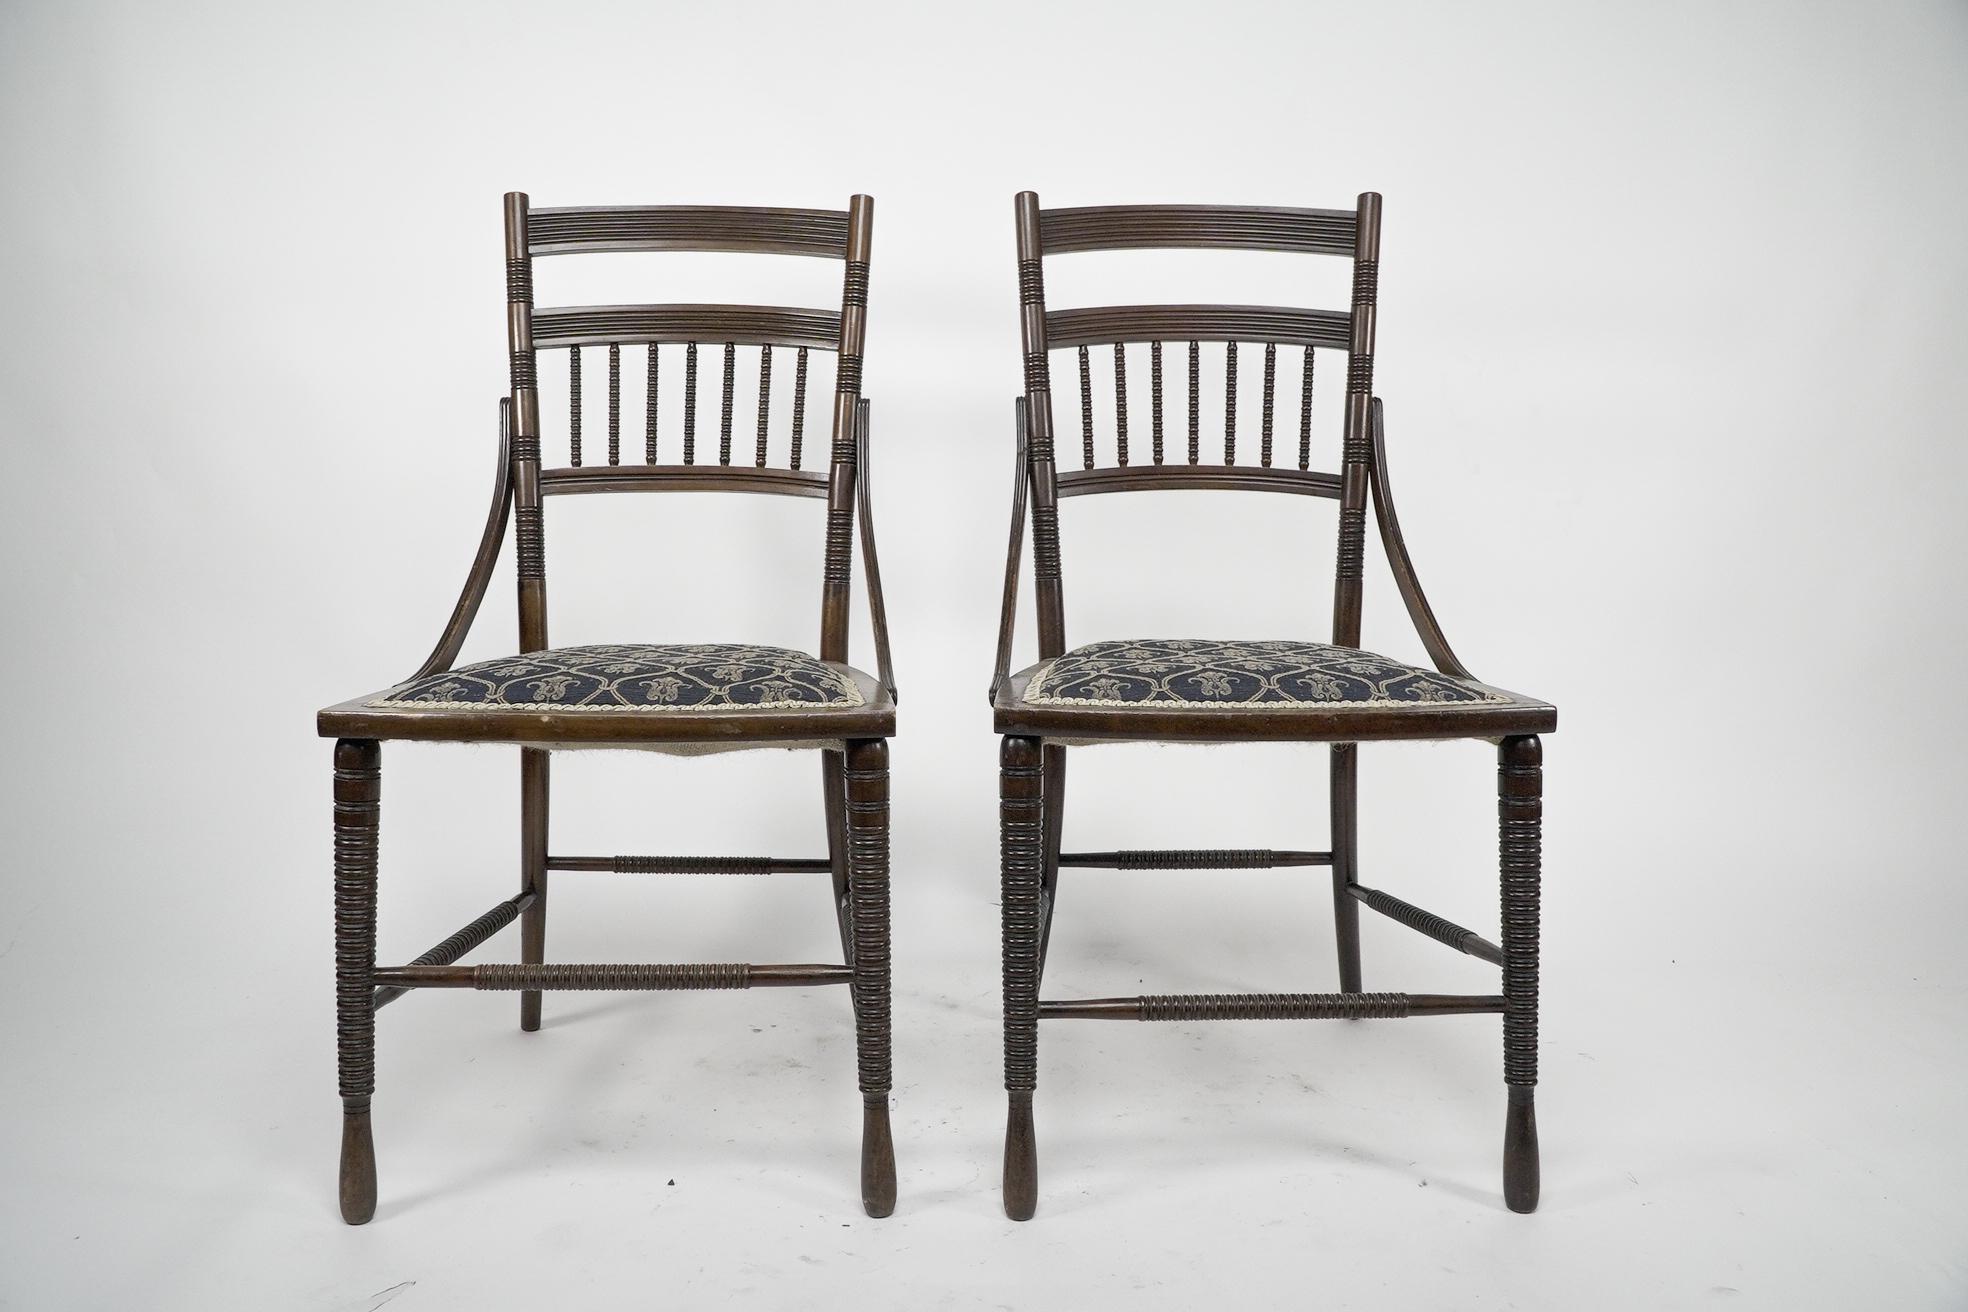 R. W. Edis, probably made by Jackson and Graham. A fine pair of Aesthetic Movement Walnut side chairs with fine ring turned and incised tramline details, and sweeping side supports. A chair of the same design was exhibited at The Health Exhibition